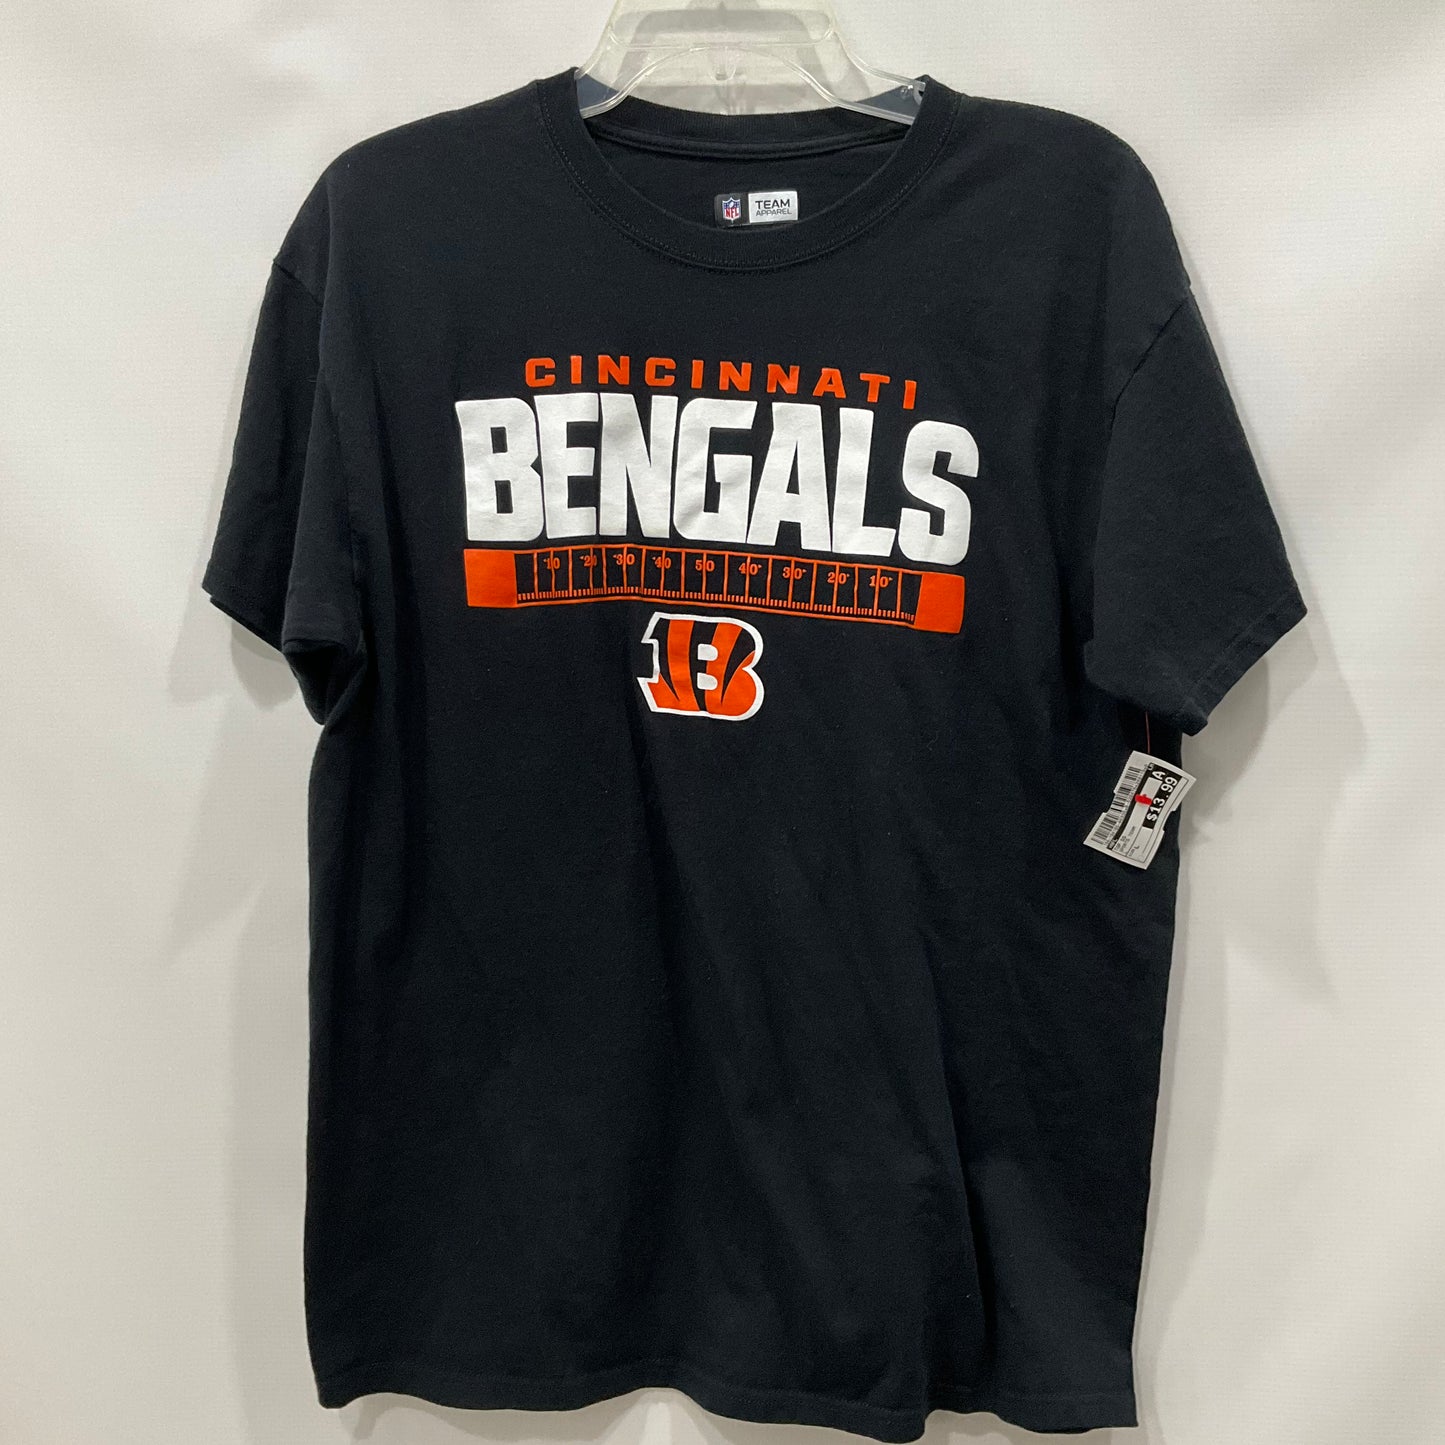 Top Short Sleeve By Nfl  Size: L